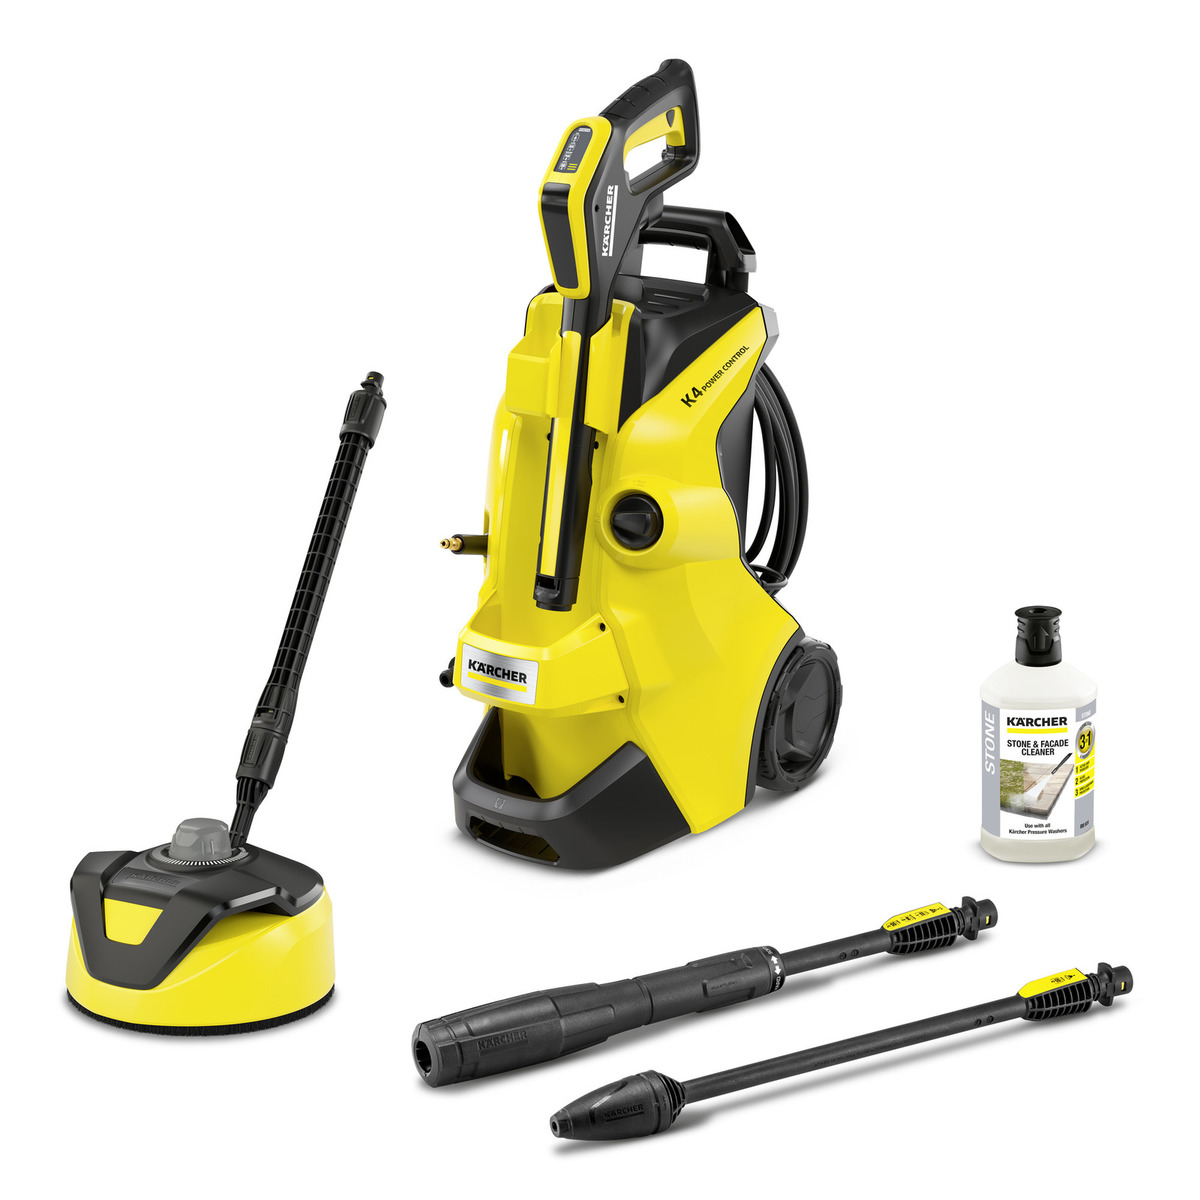 meat basic Parameters Karcher K4 Power Control Home Pressure Washer - Cleaning Equipment Scotland